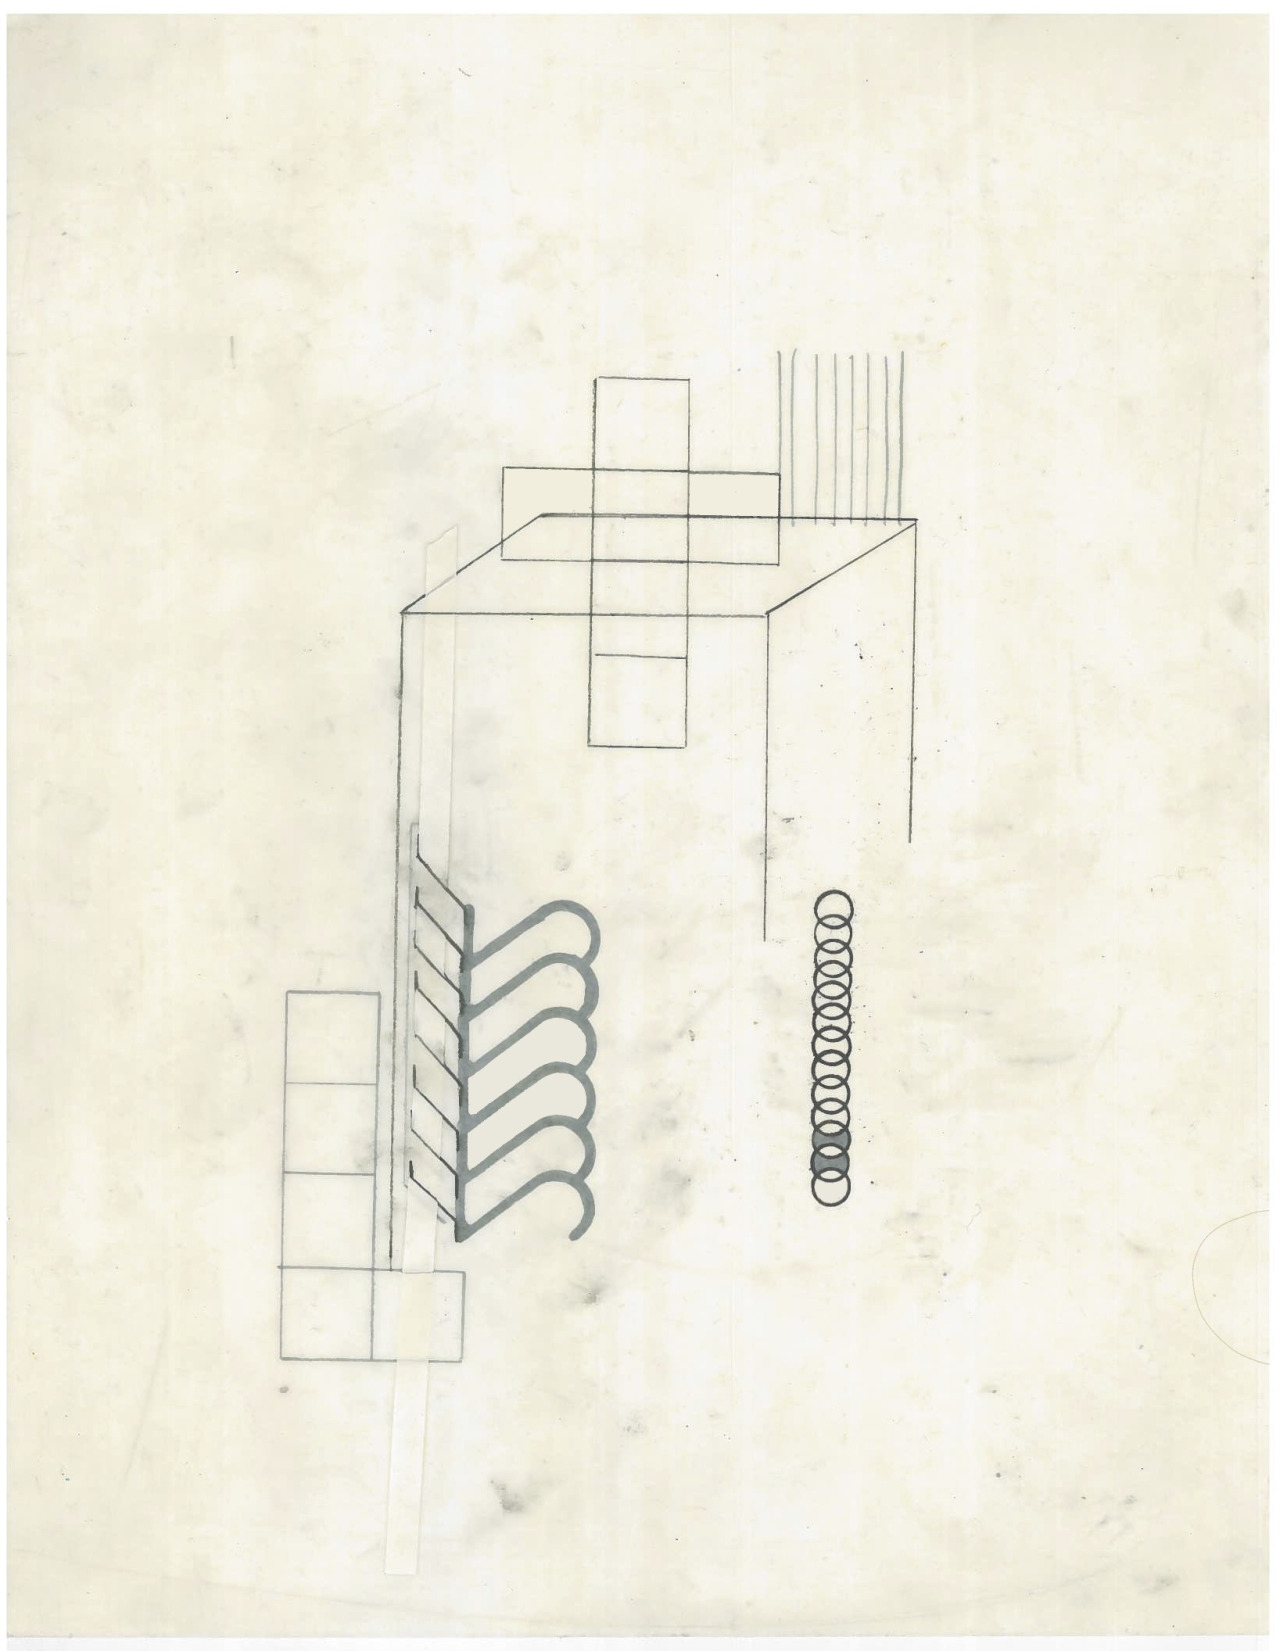 Untitled (the city, observations 19B)  Pencil, collage and layered oiled fabriano paper.   279mm x 216mm  December 2013